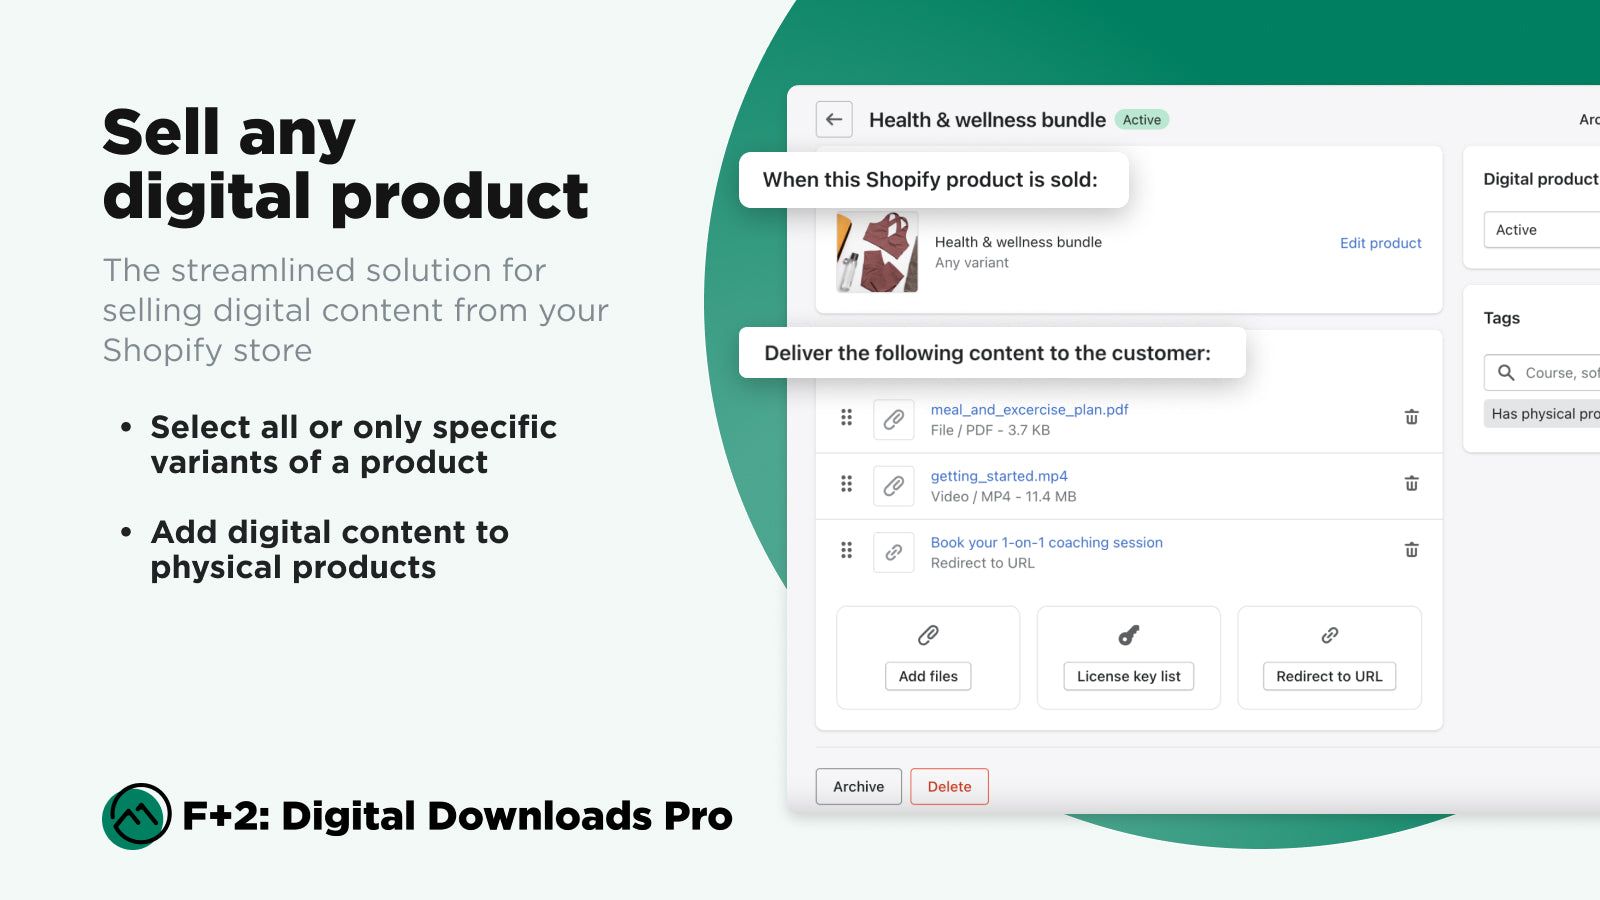 The streamlined solution for selling digital downloads